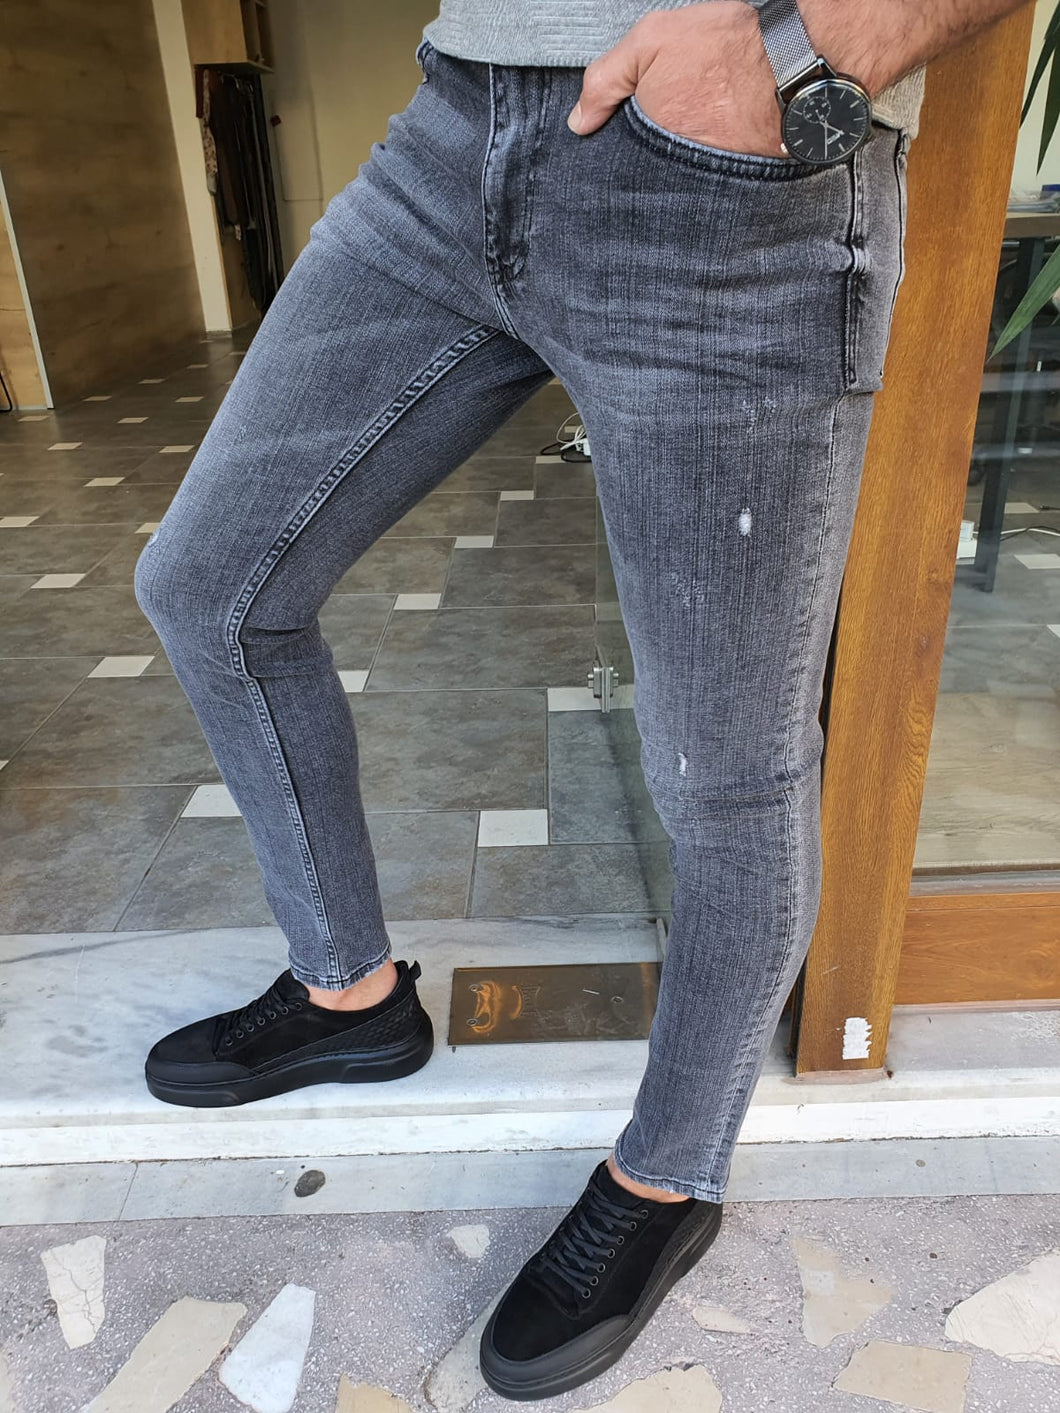 Jason Slim Fit Special Edition Gray & Black Ripped Jeans